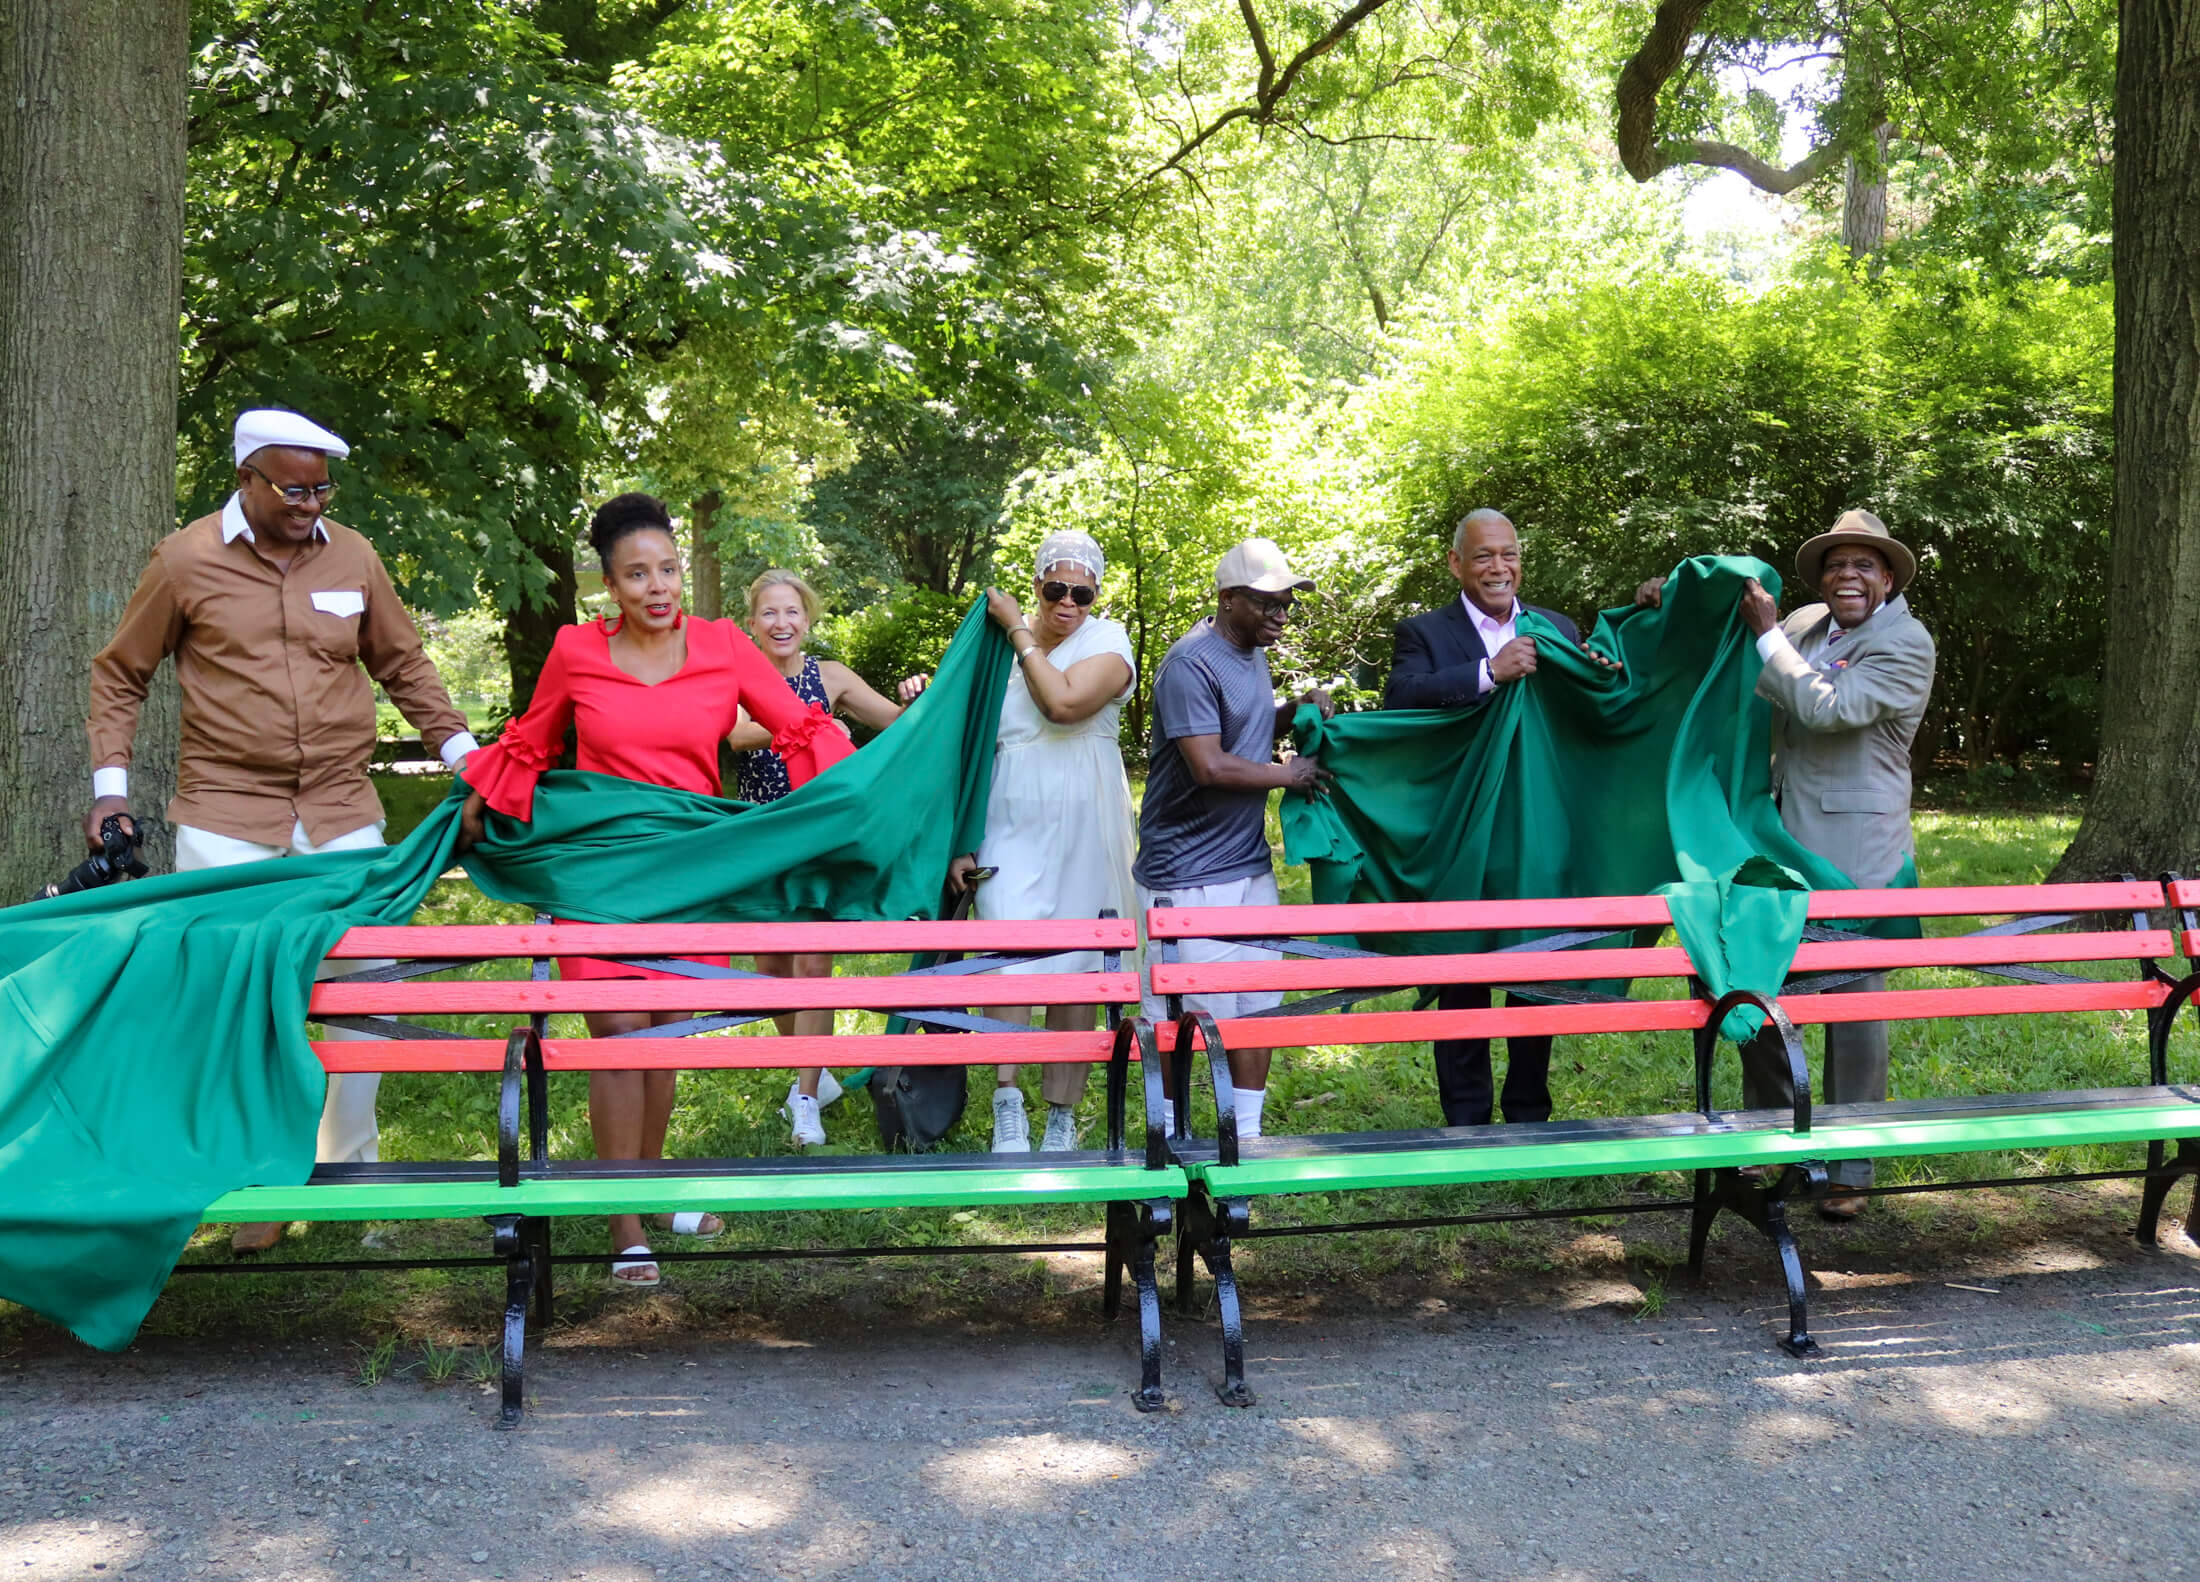 The newly named seating area was unveiled by a group including photographer Jamel Shabazz, Councilmember Laurie Cumbo, Prospect Park Alliance President Sue Donoghue, and NYC Parks Commissioner Mitchell Silver